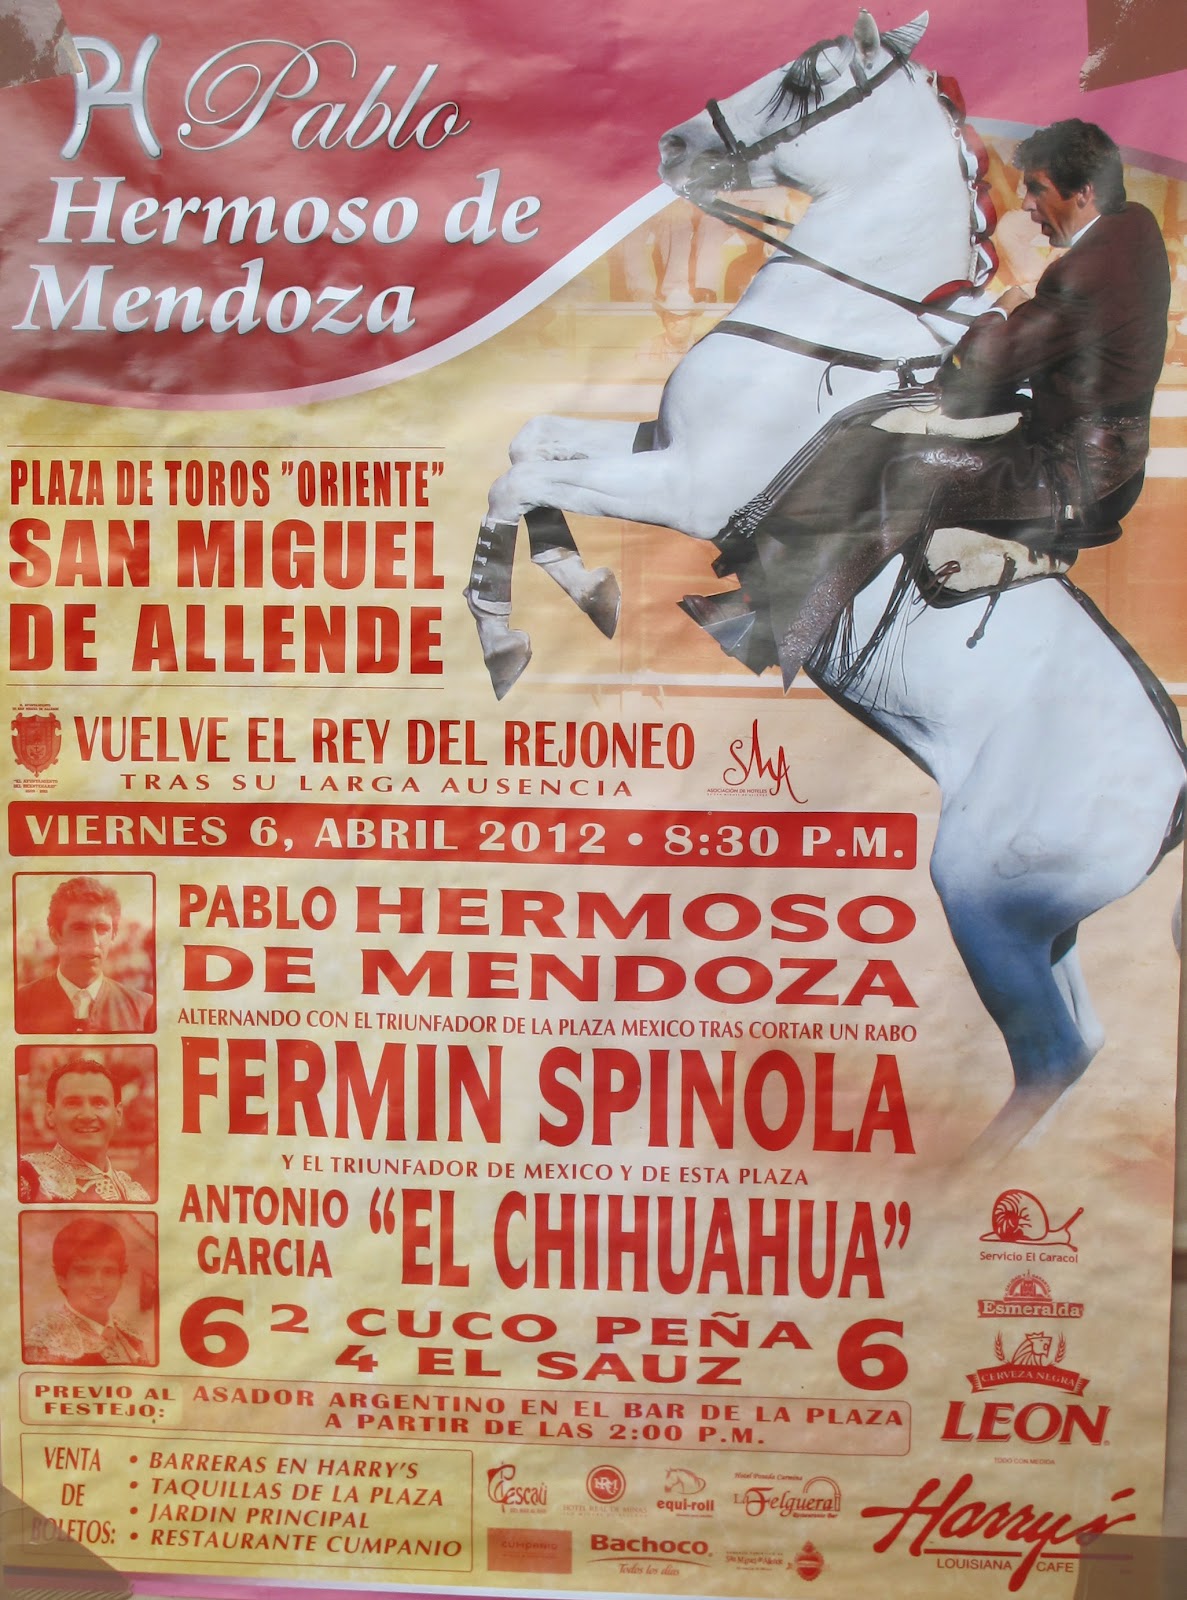 Robin Talks, Cooks and Travels: Love the posters around San Miguel